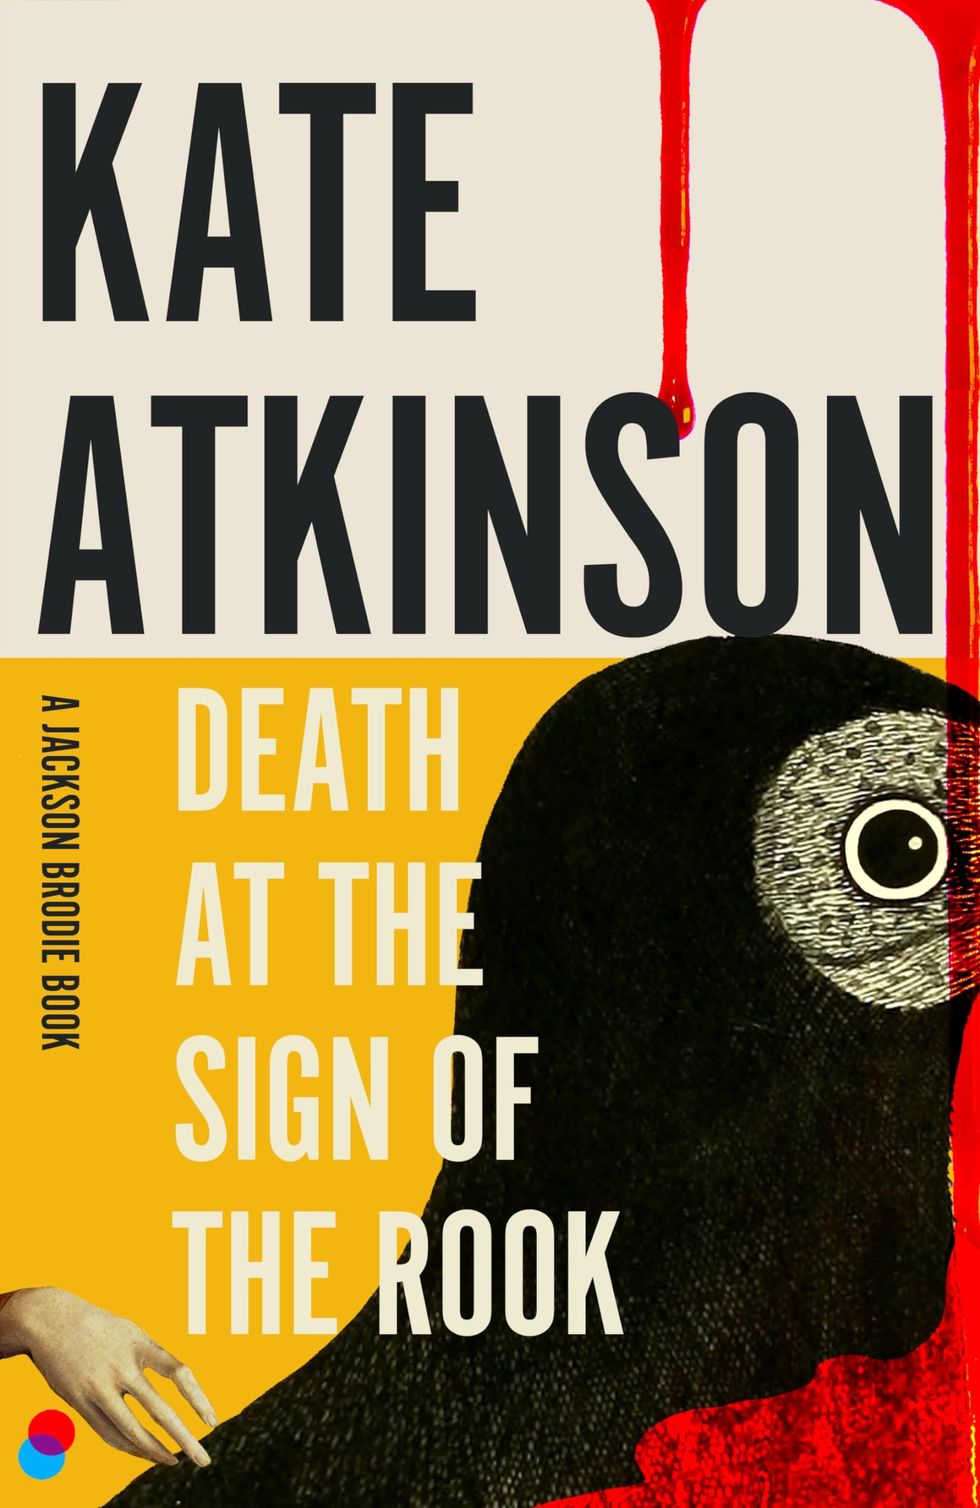 Death at the Sign of the Rook by Kate Atkinson